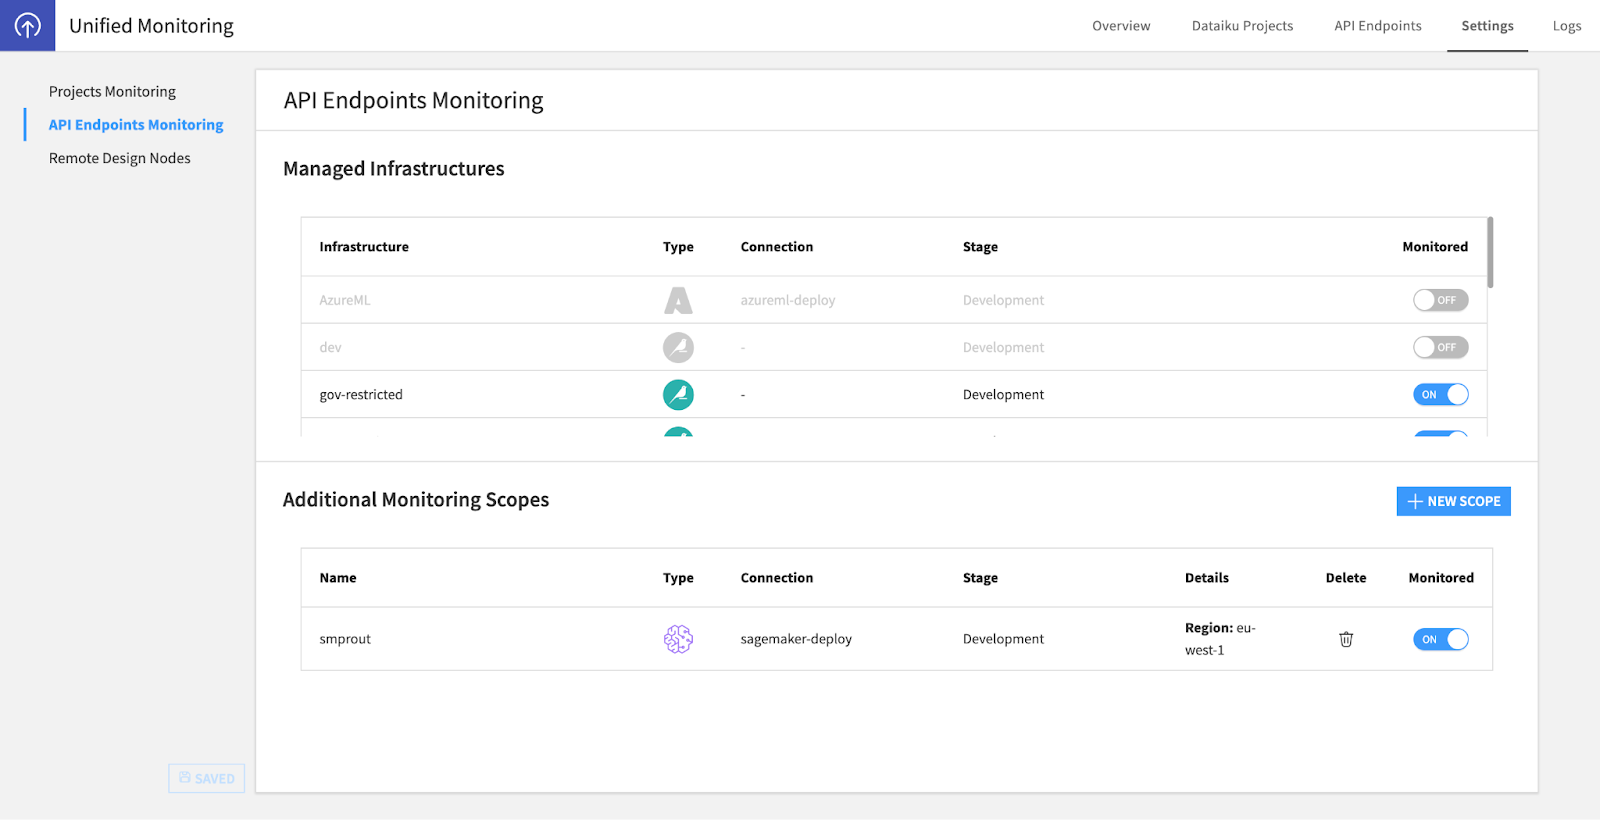 Multiple scopes can be added to Unified Monitoring, even from disparate cloud environments.